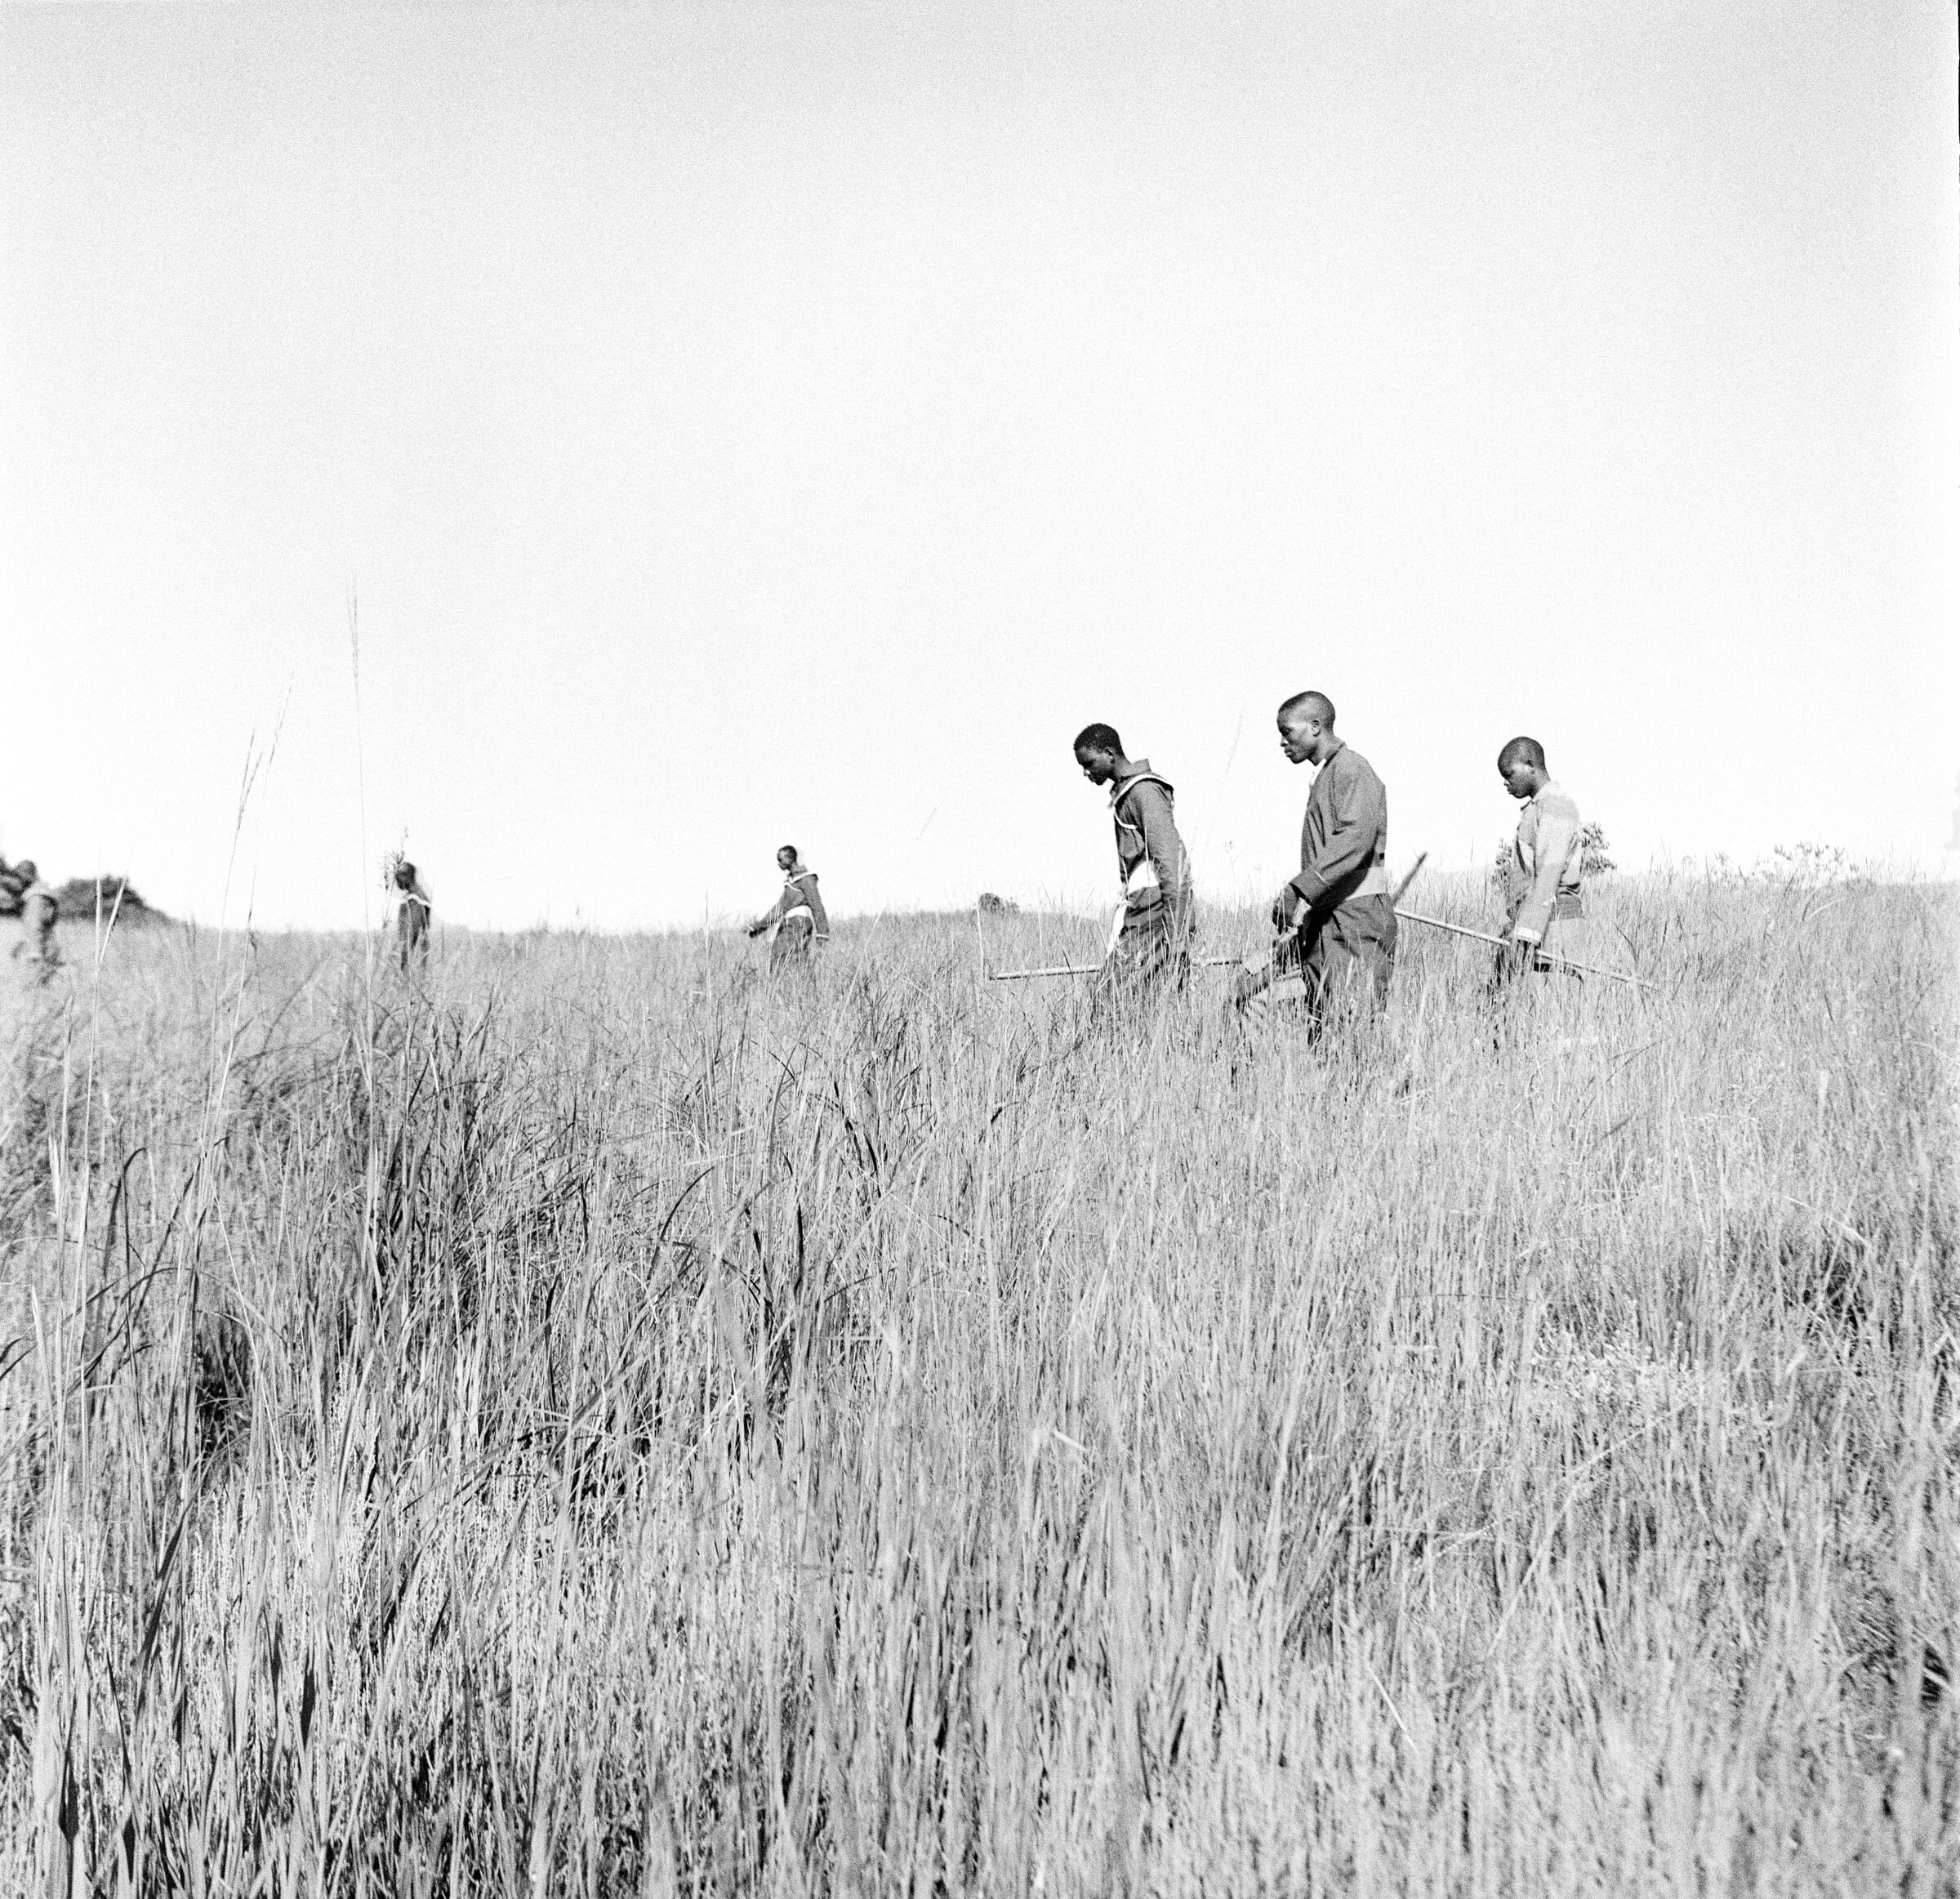  Members of a Zioni church sect walk through summer grass on their way to their outdoor worship space -  circular areas cleared and smoothed to allow for their ecstatic dancing, Melville Koppie, Johannesburg 2007. Photo Greg Marinovich 